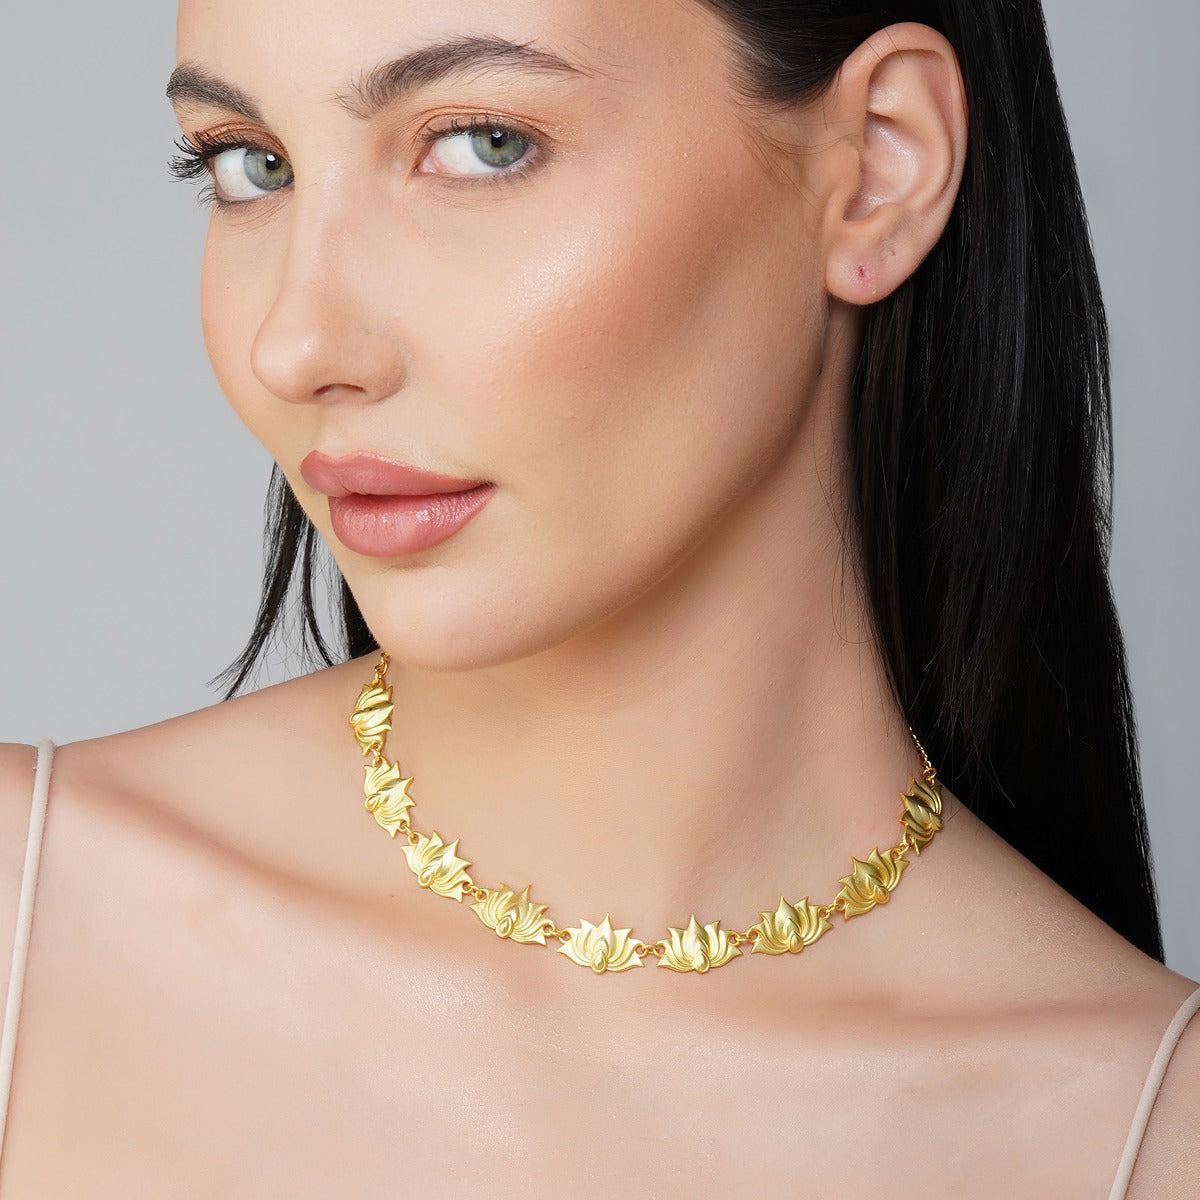 Tranquil Moods Lotus Choker Necklace